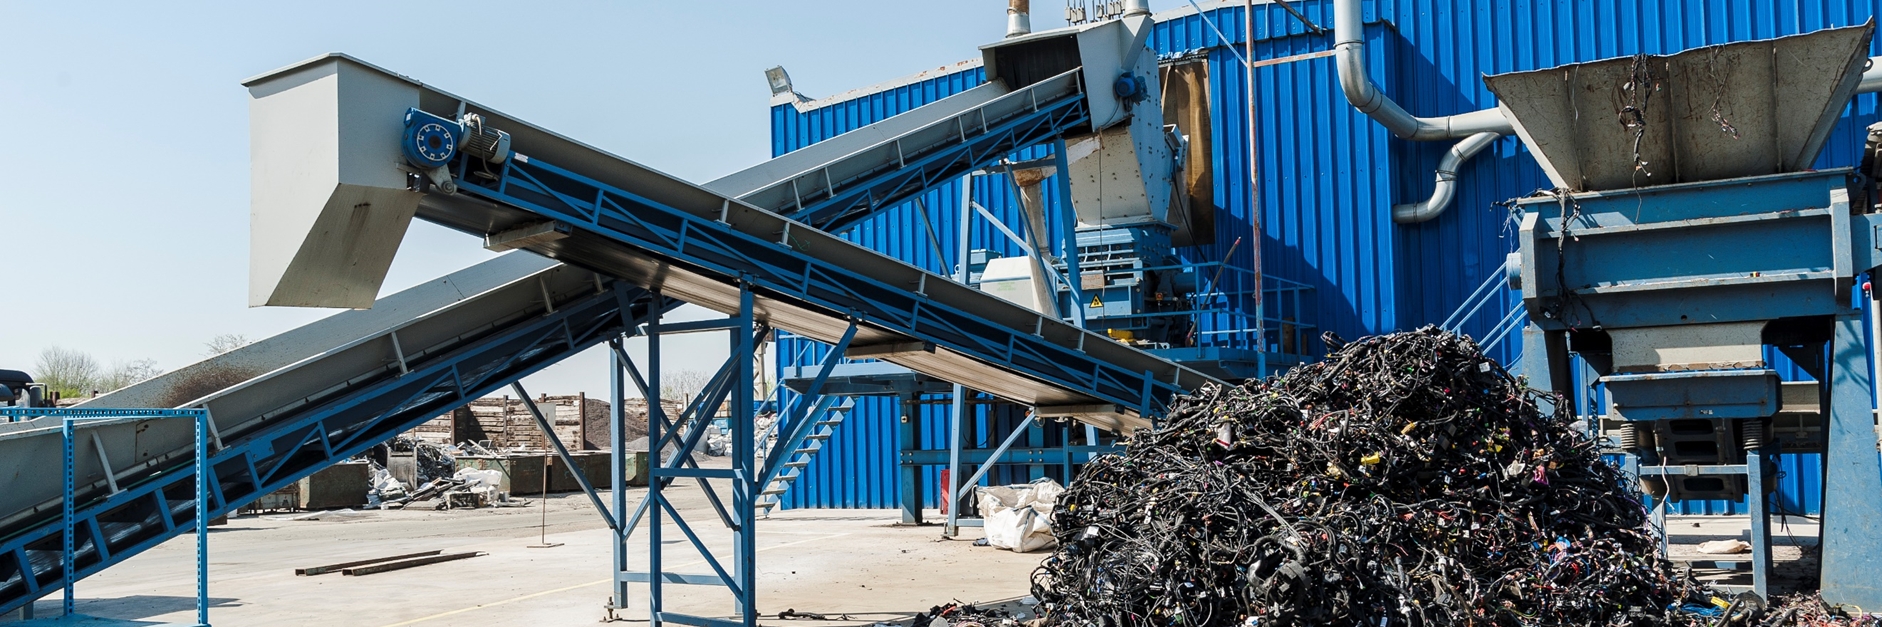 1920x640 MT1nd Recycling Plant